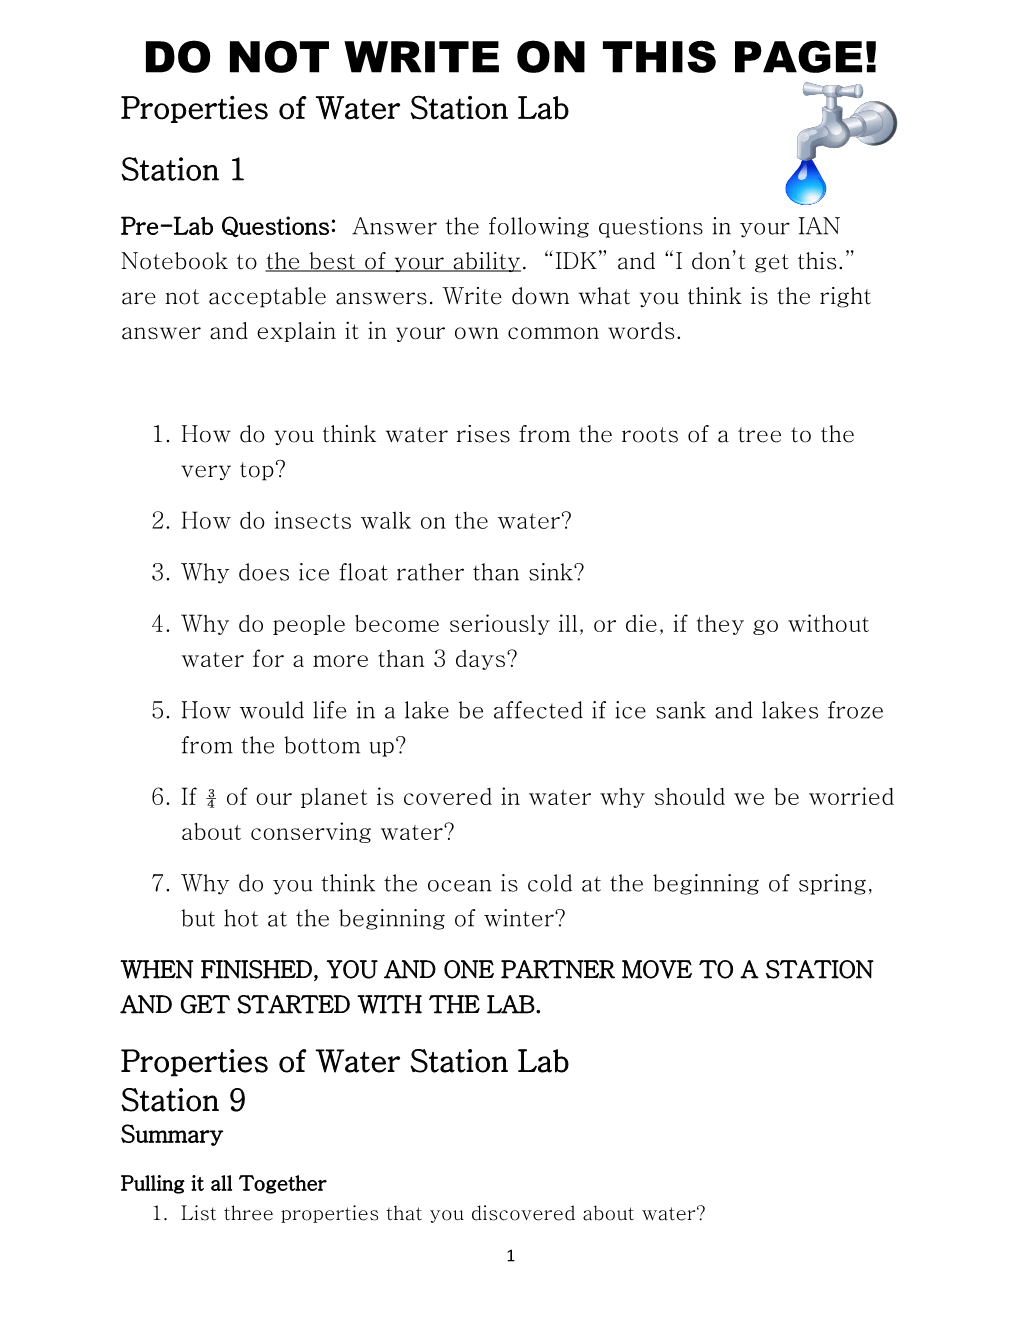 Properties of Water Station Lab s1